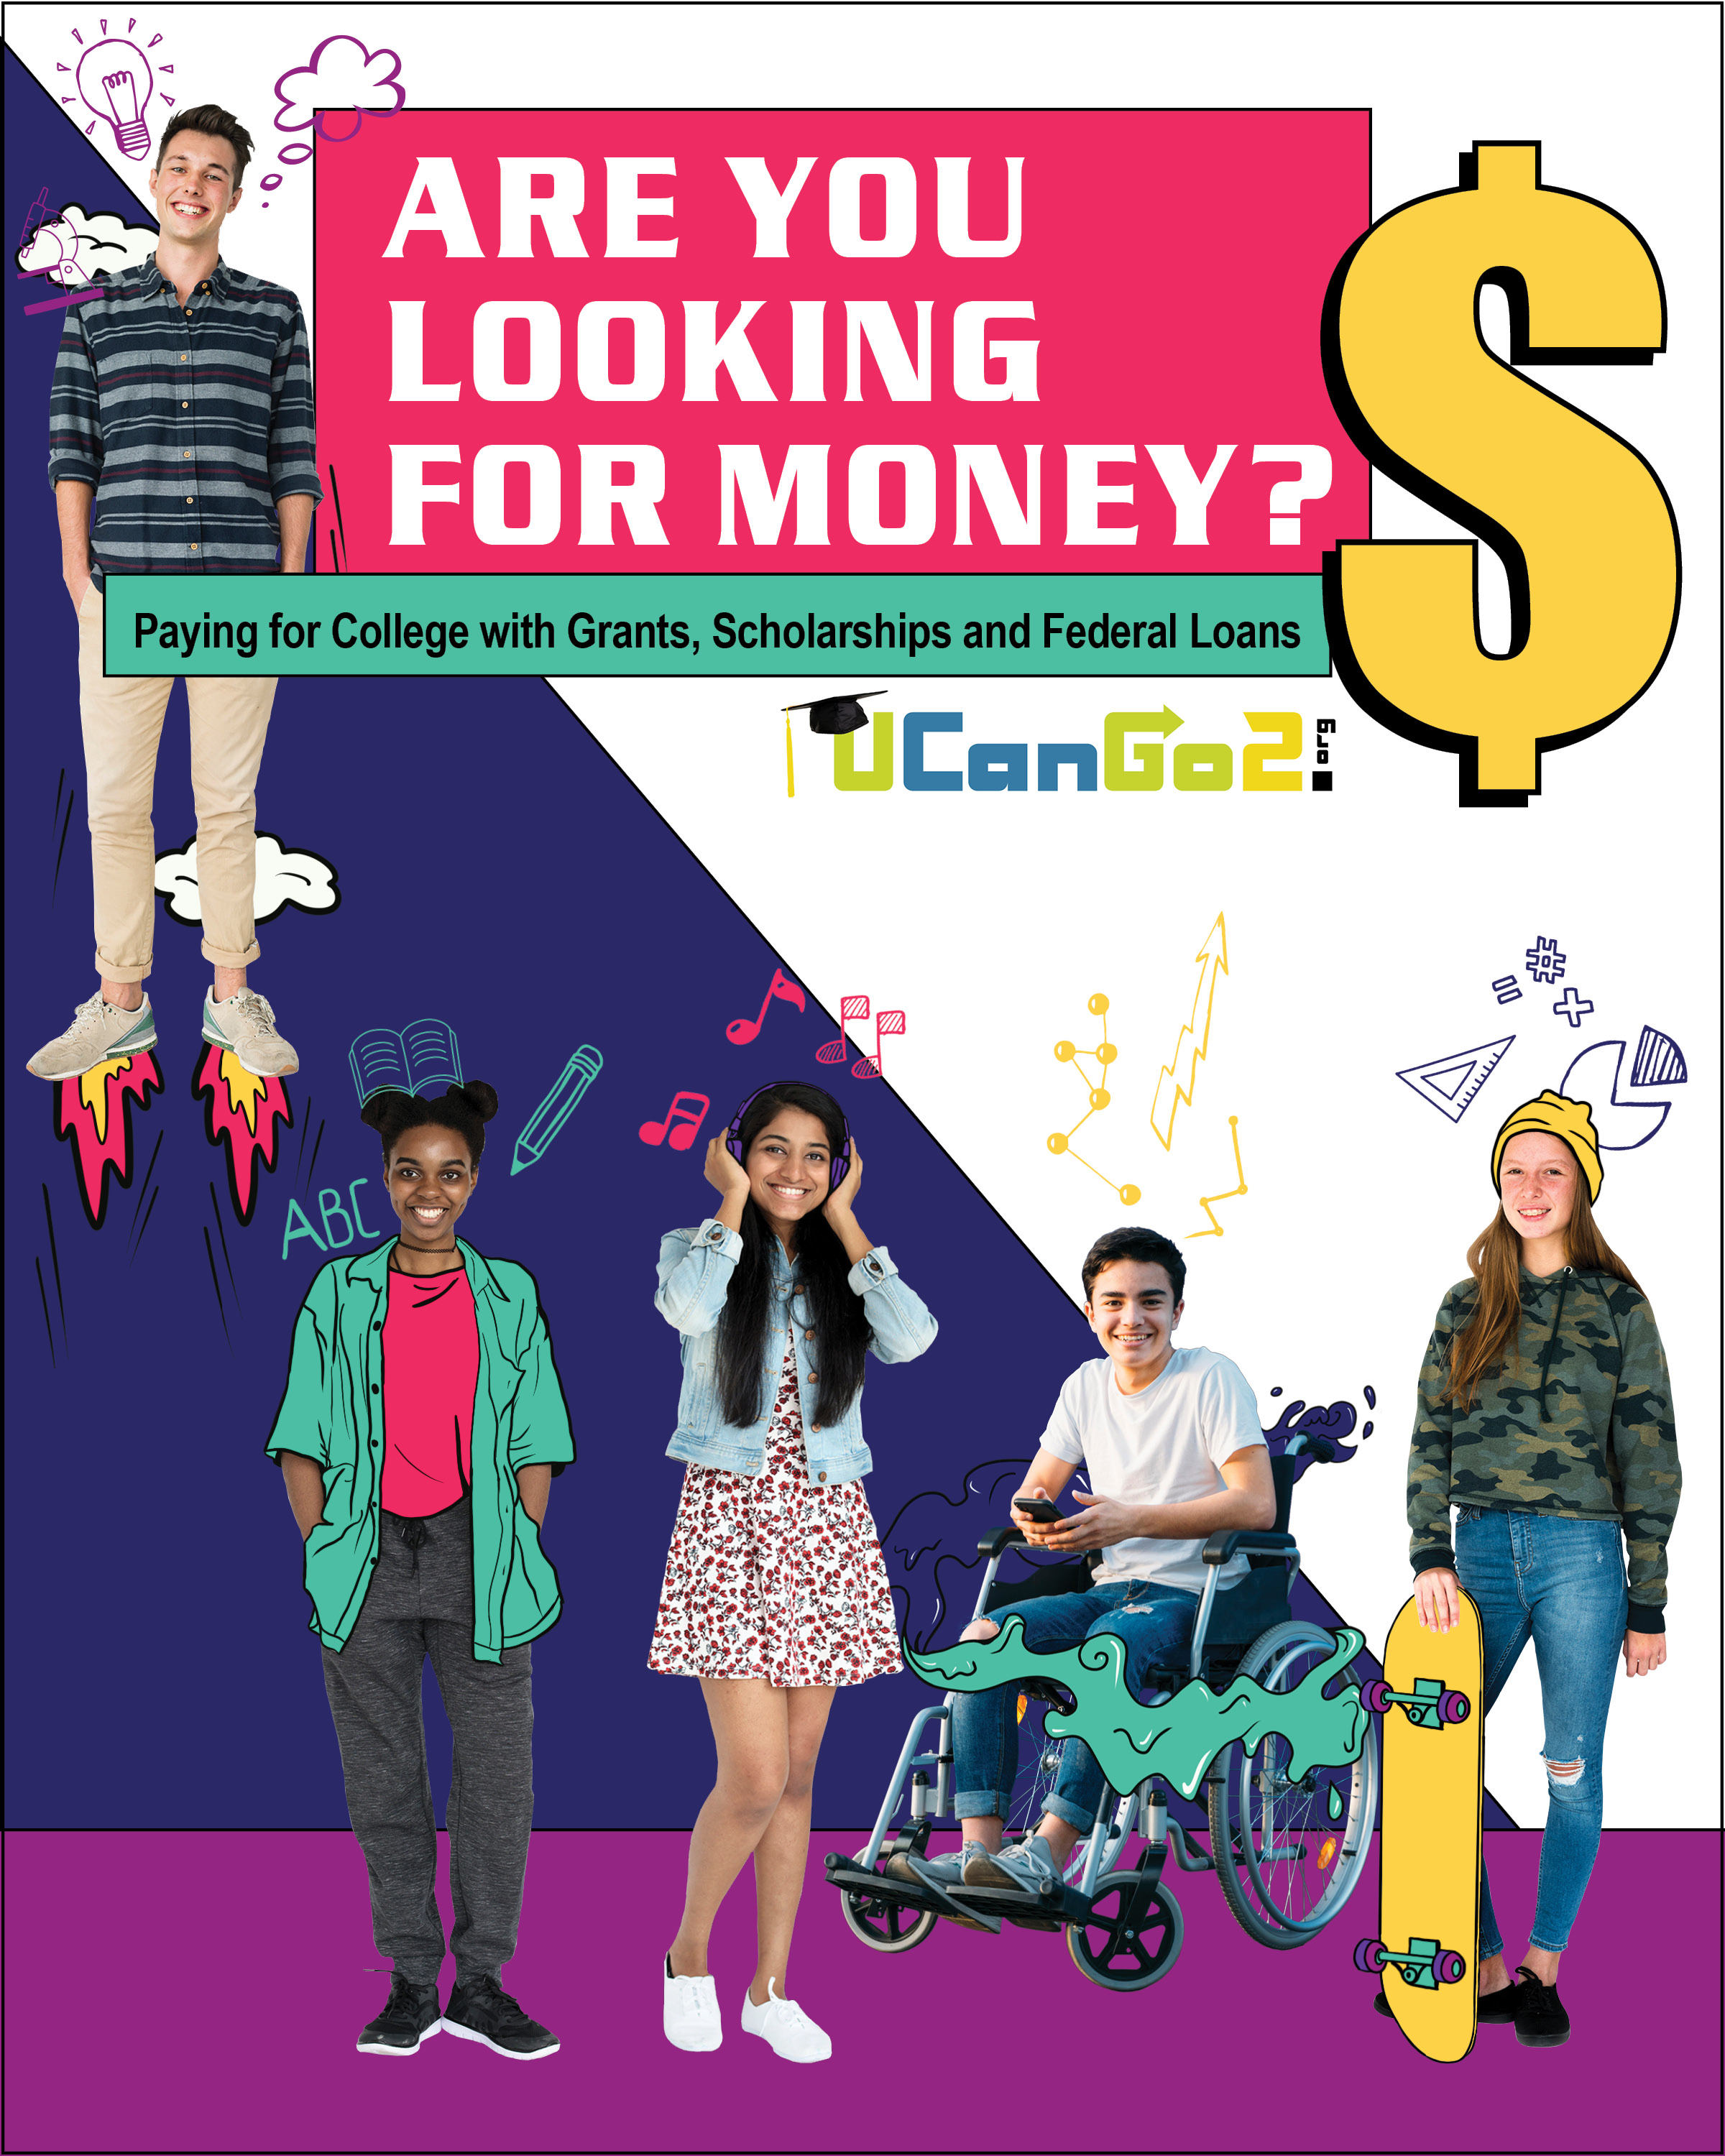 PDF of Are You Looking for Money